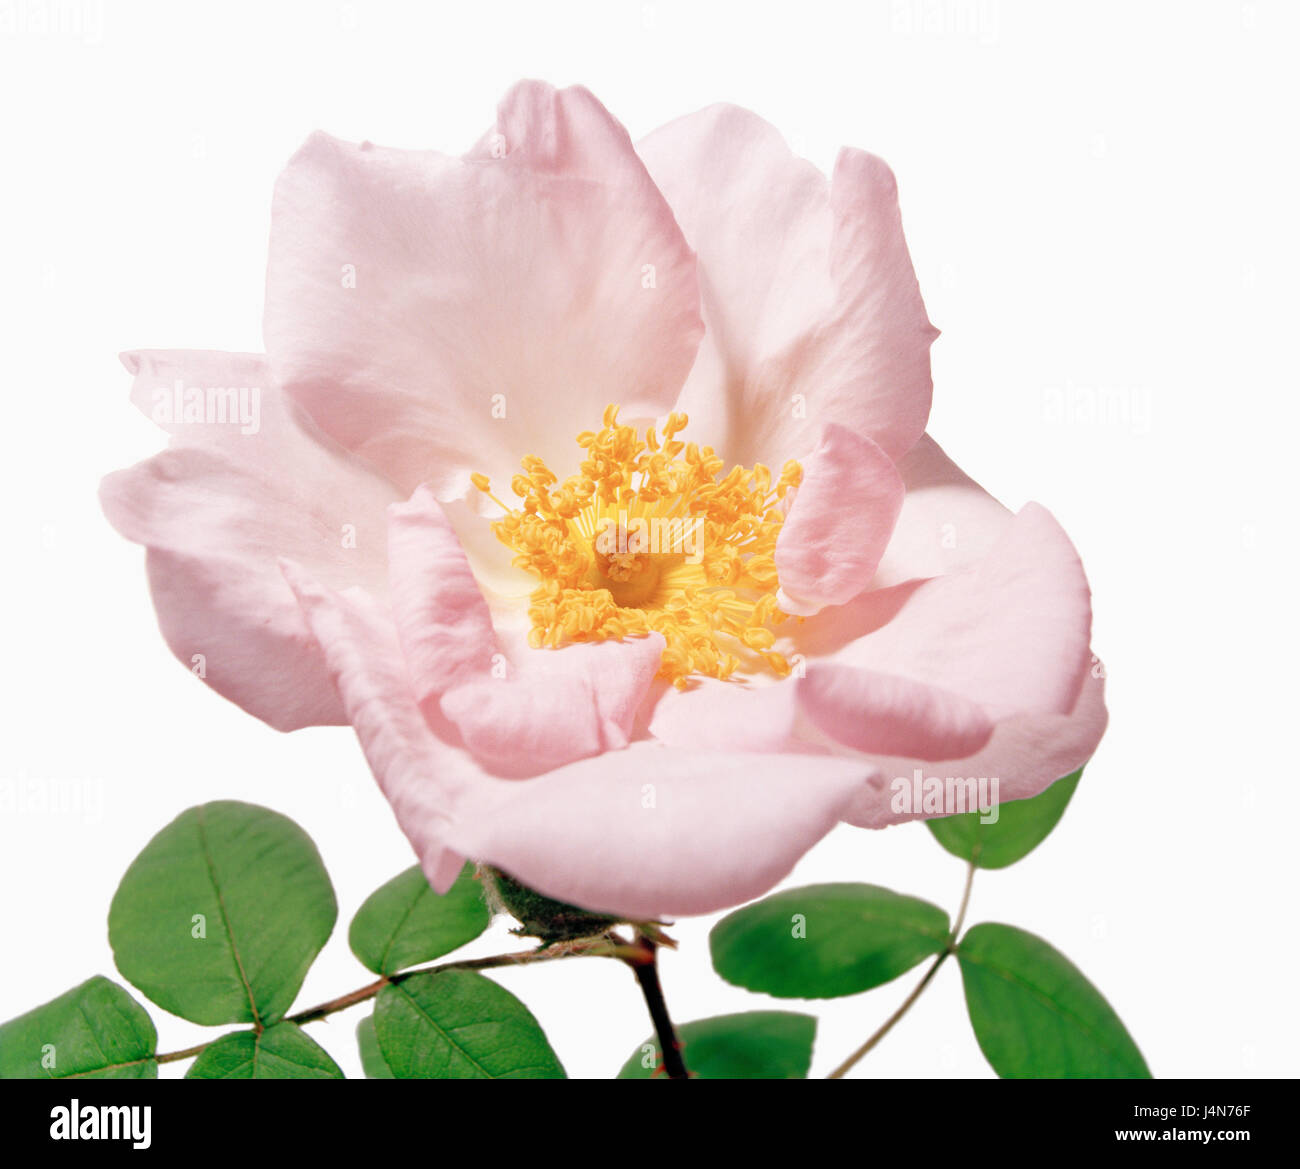 Rose, name: Rose richardii Rehd., dissection Gallicanae, wild roses, introduced in 1902, Stock Photo